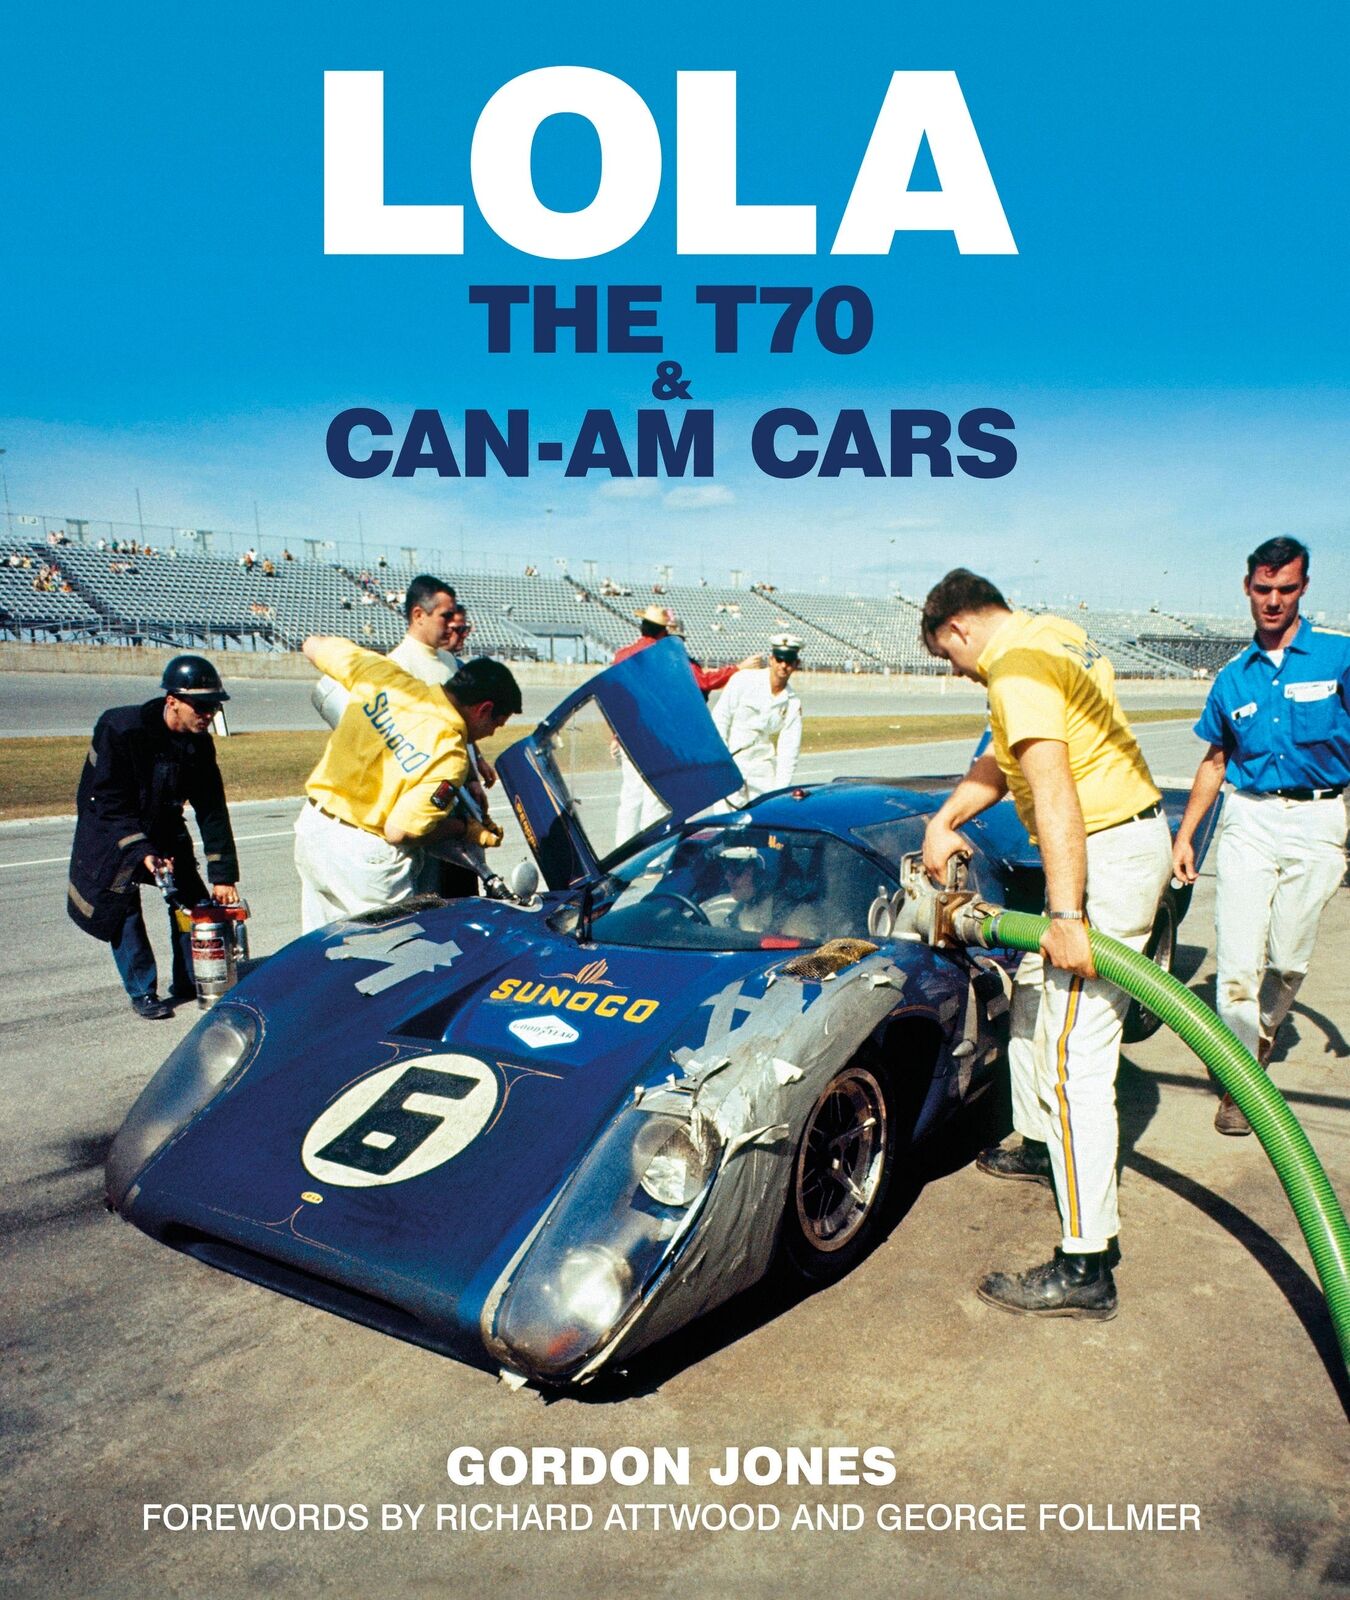 LOLA The T70 and Can-Am Cars book T160 T310 Jones Follmer